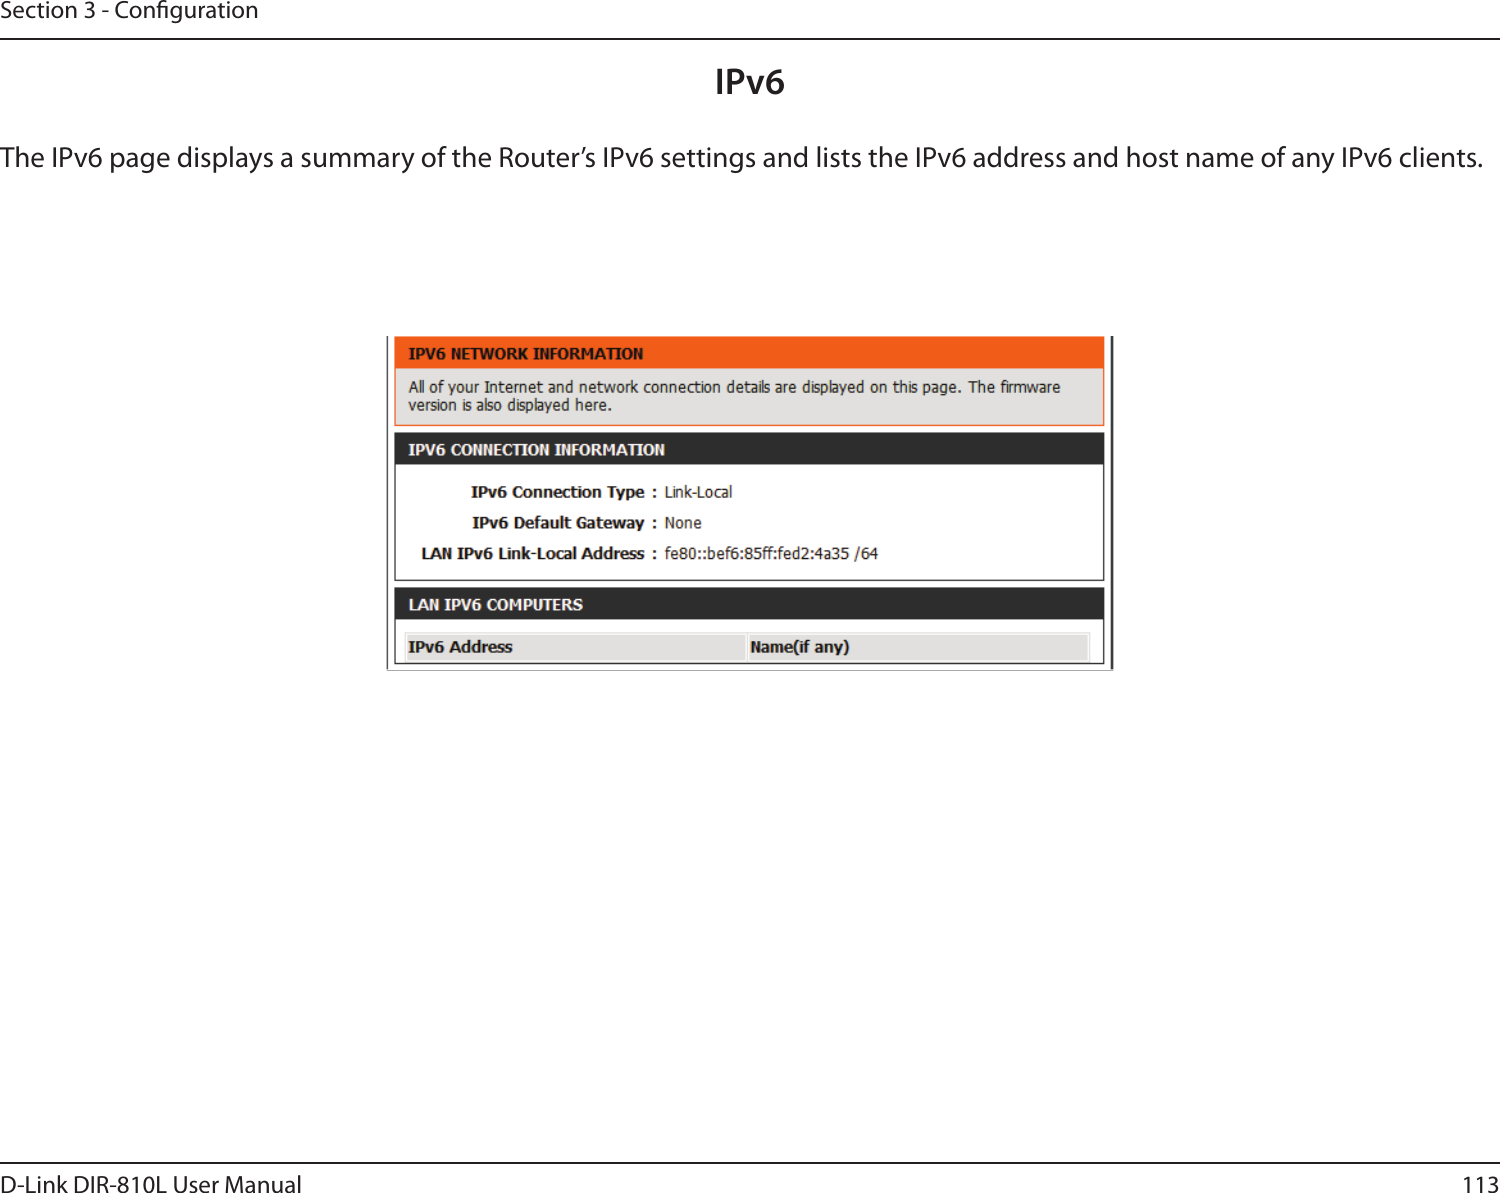 113D-Link DIR-810L User ManualSection 3 - CongurationIPv6The IPv6 page displays a summary of the Router’s IPv6 settings and lists the IPv6 address and host name of any IPv6 clients. 